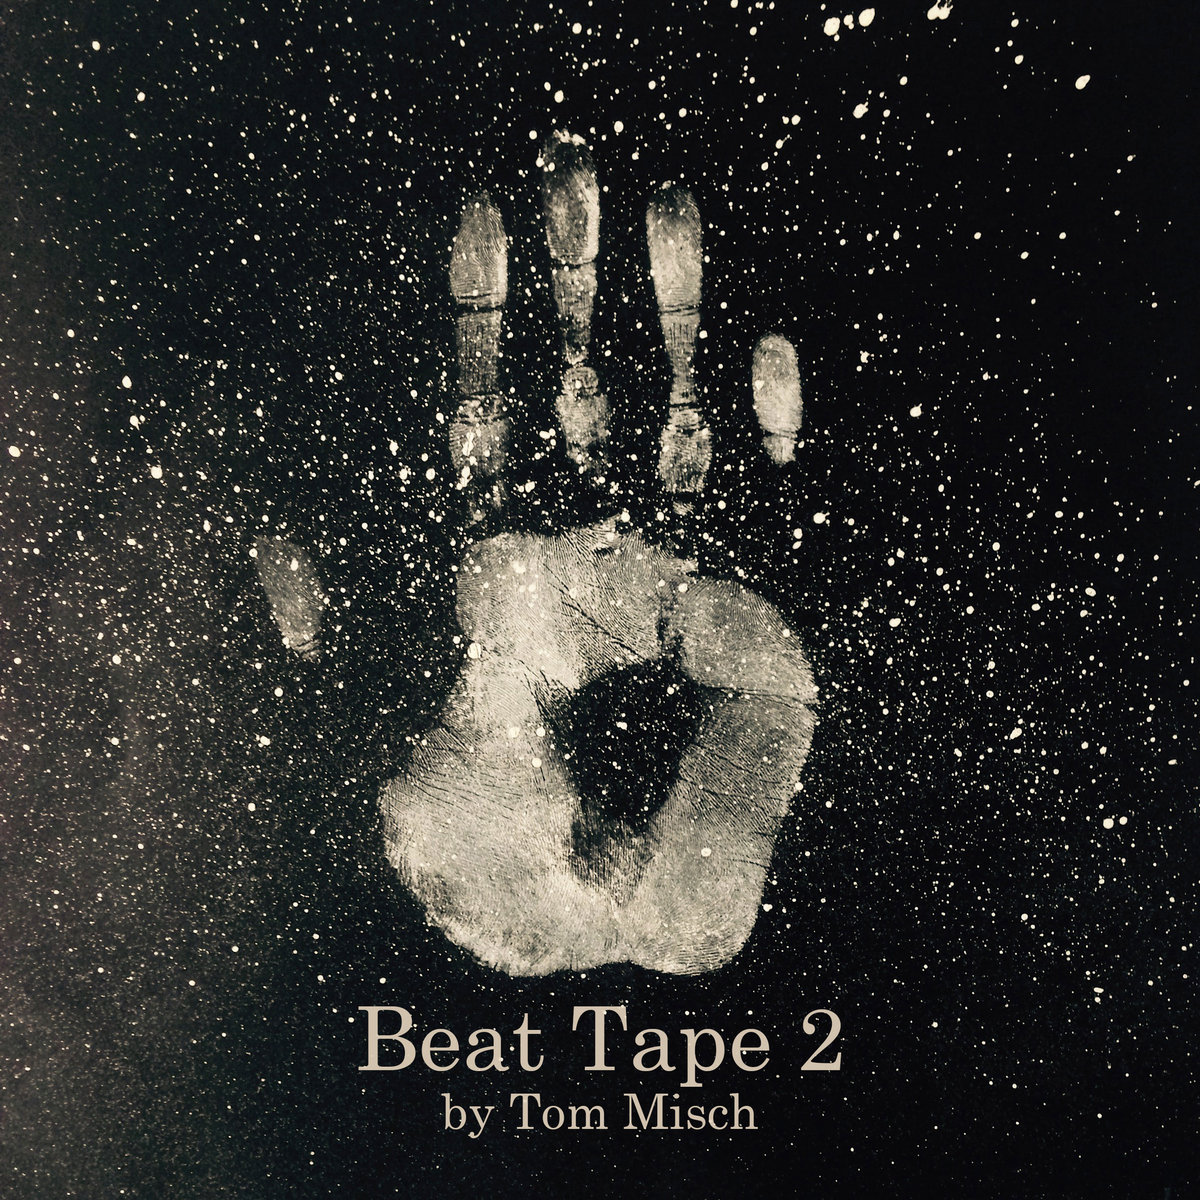 Tom Misch - "Beat Tape 2 (Extended Edition)" (Release)